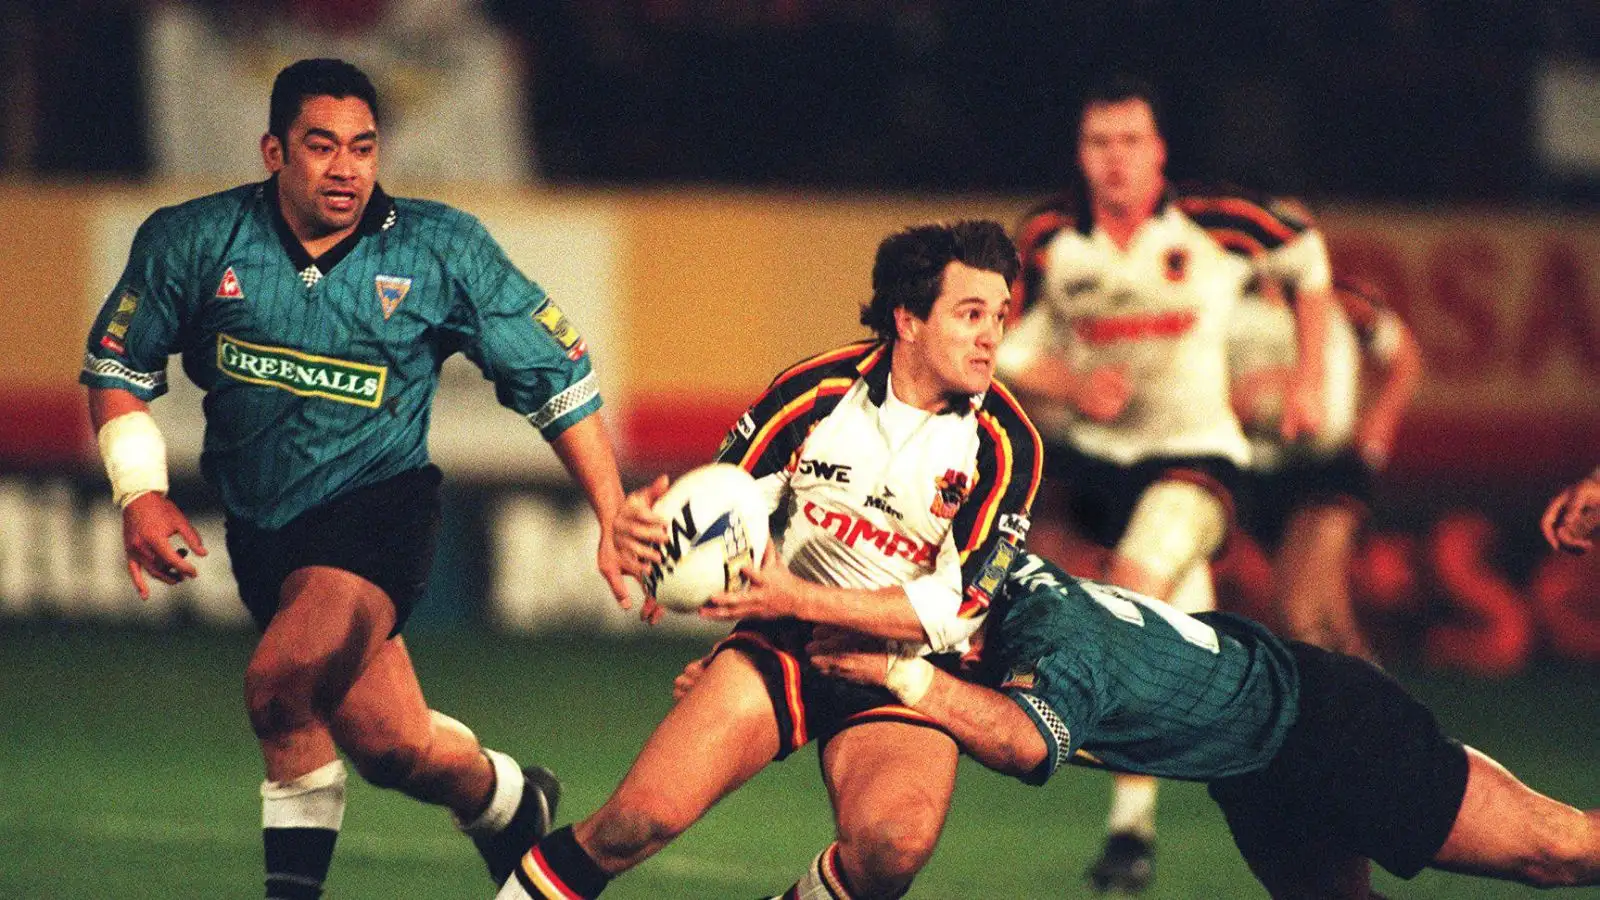 Australian former Super League ace, ex-Bradford Bulls & Hull FC star inducted into Hall of Fame